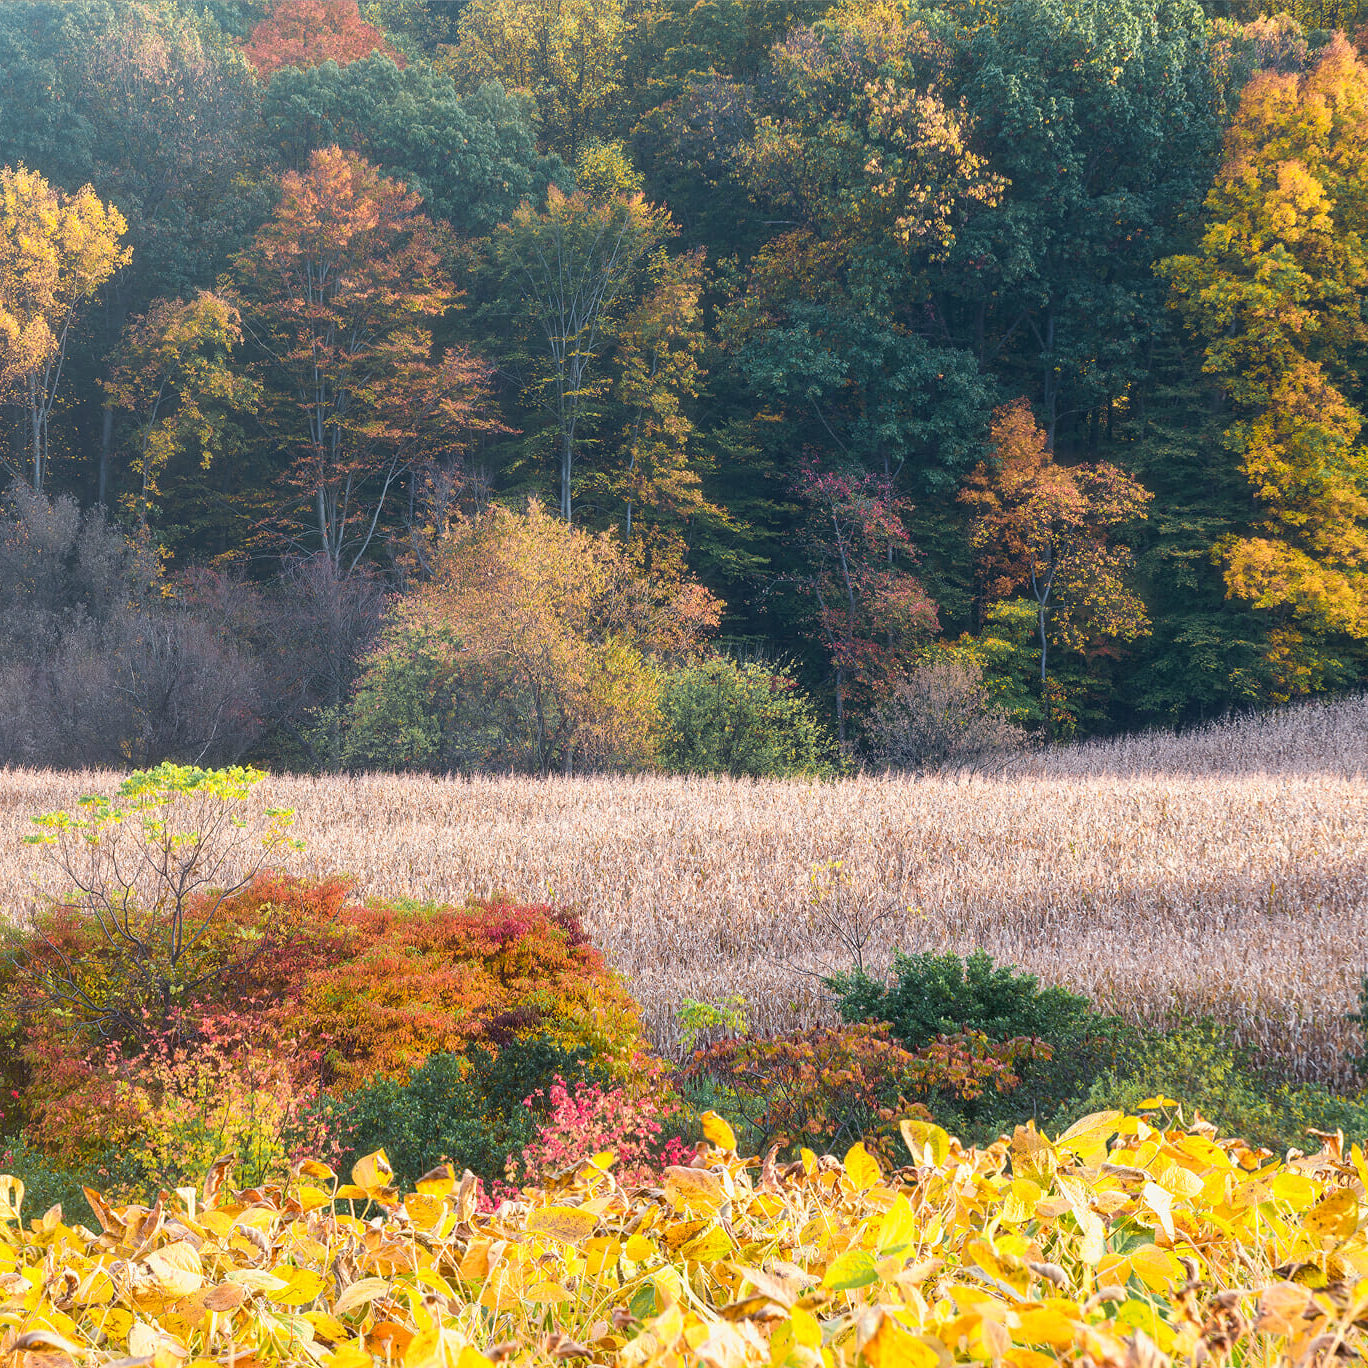 Southeastern Pennsylvania cornfields catch the last light on a fall evening with the colorful forest backdrop lending a beautiful setting to the scene.